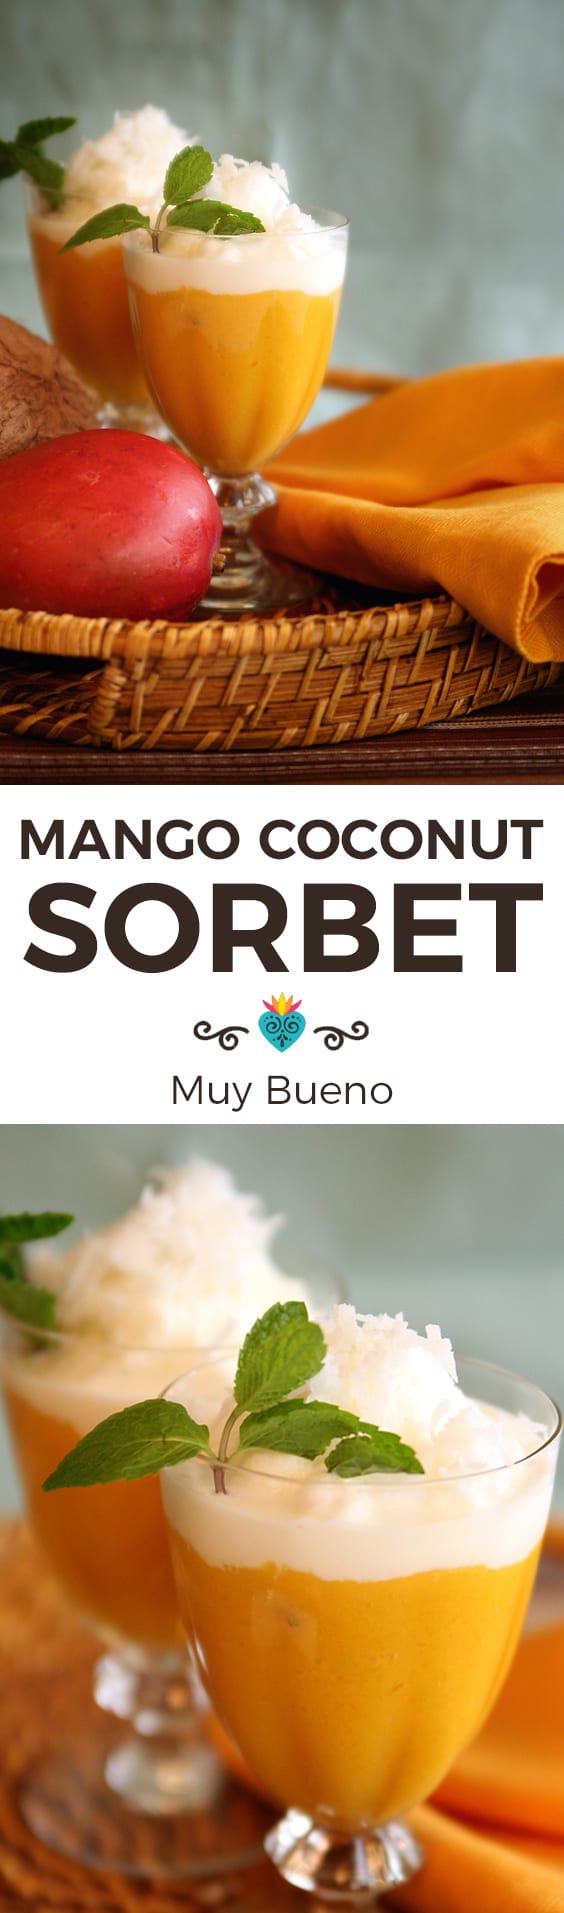 Mango Coconut Sorbet collage with text overlay